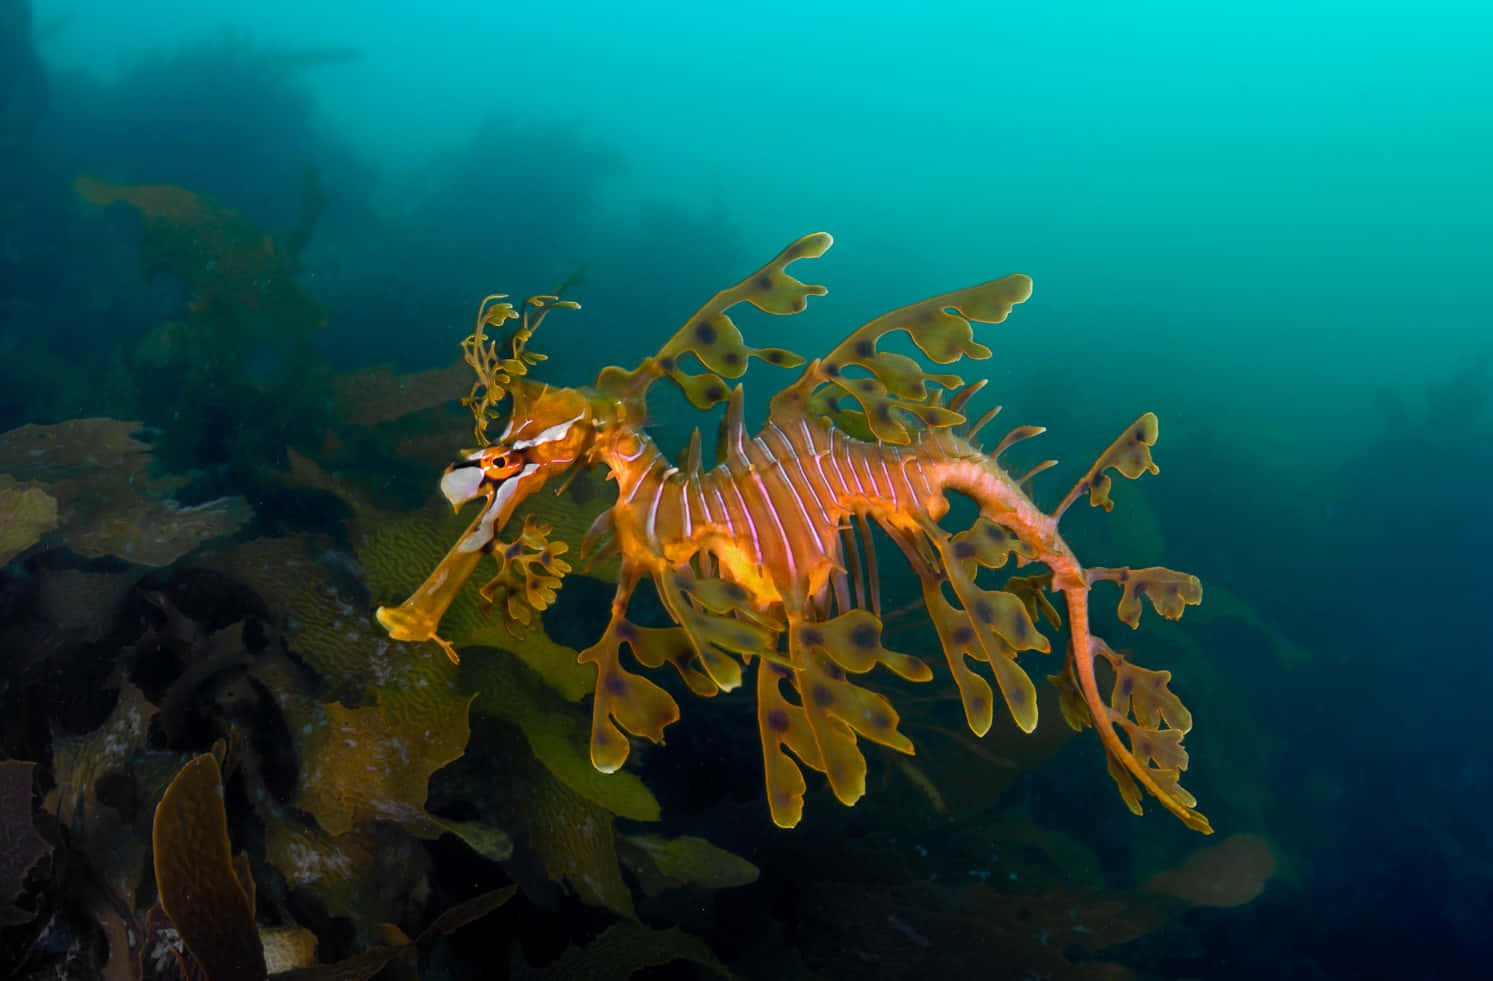 A beautiful seahorse drifting in a coral reef